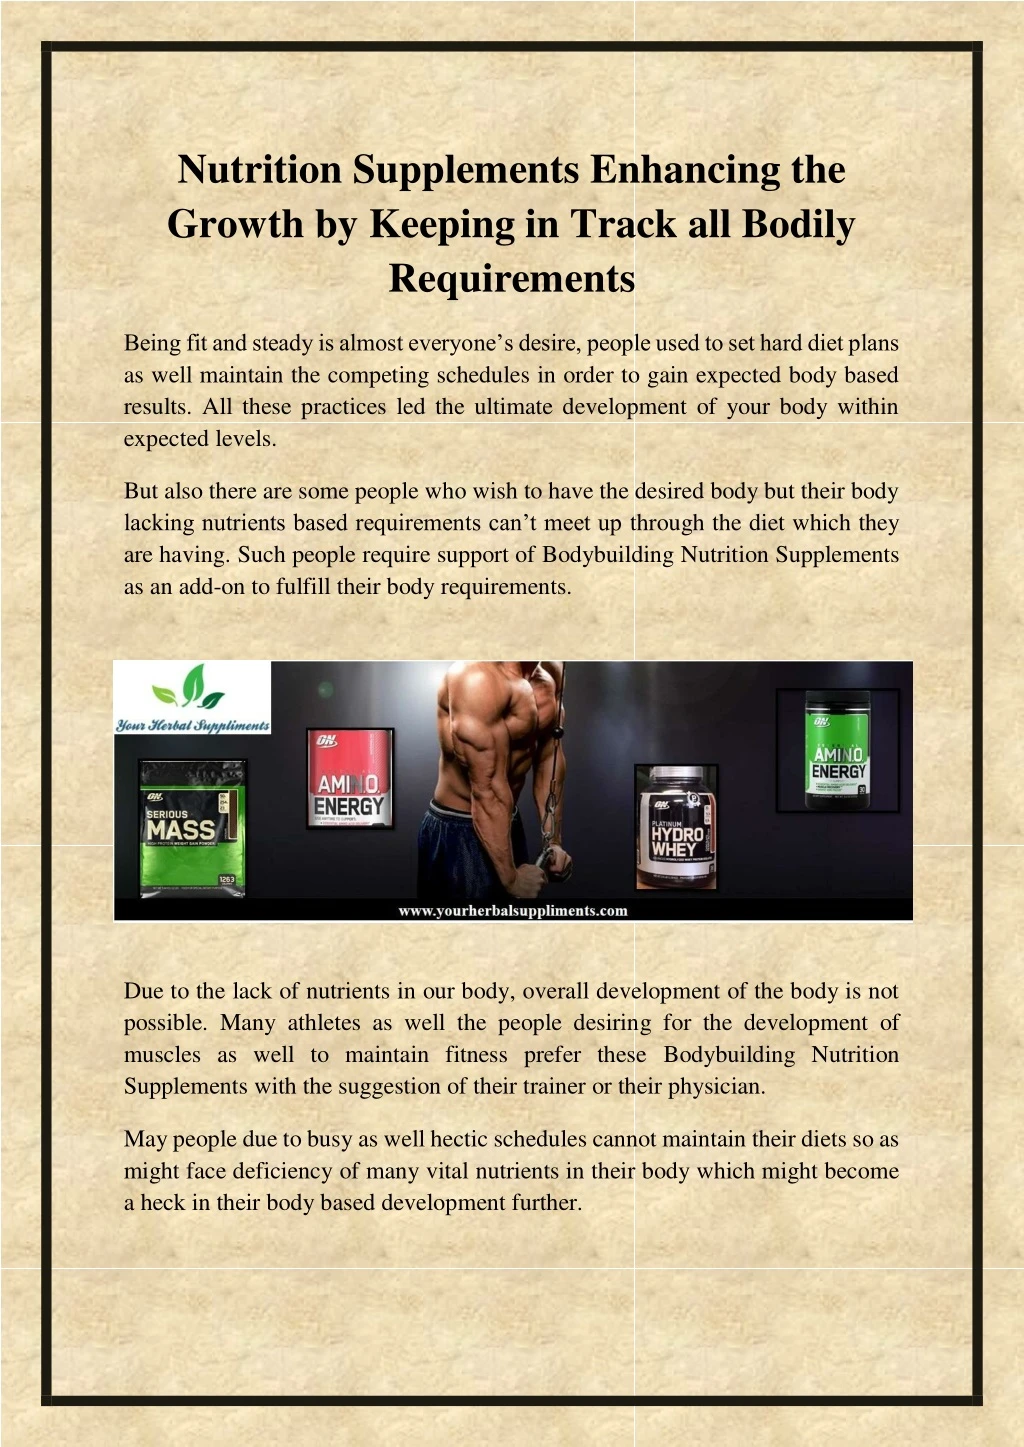 nutrition supplements enhancing the growth